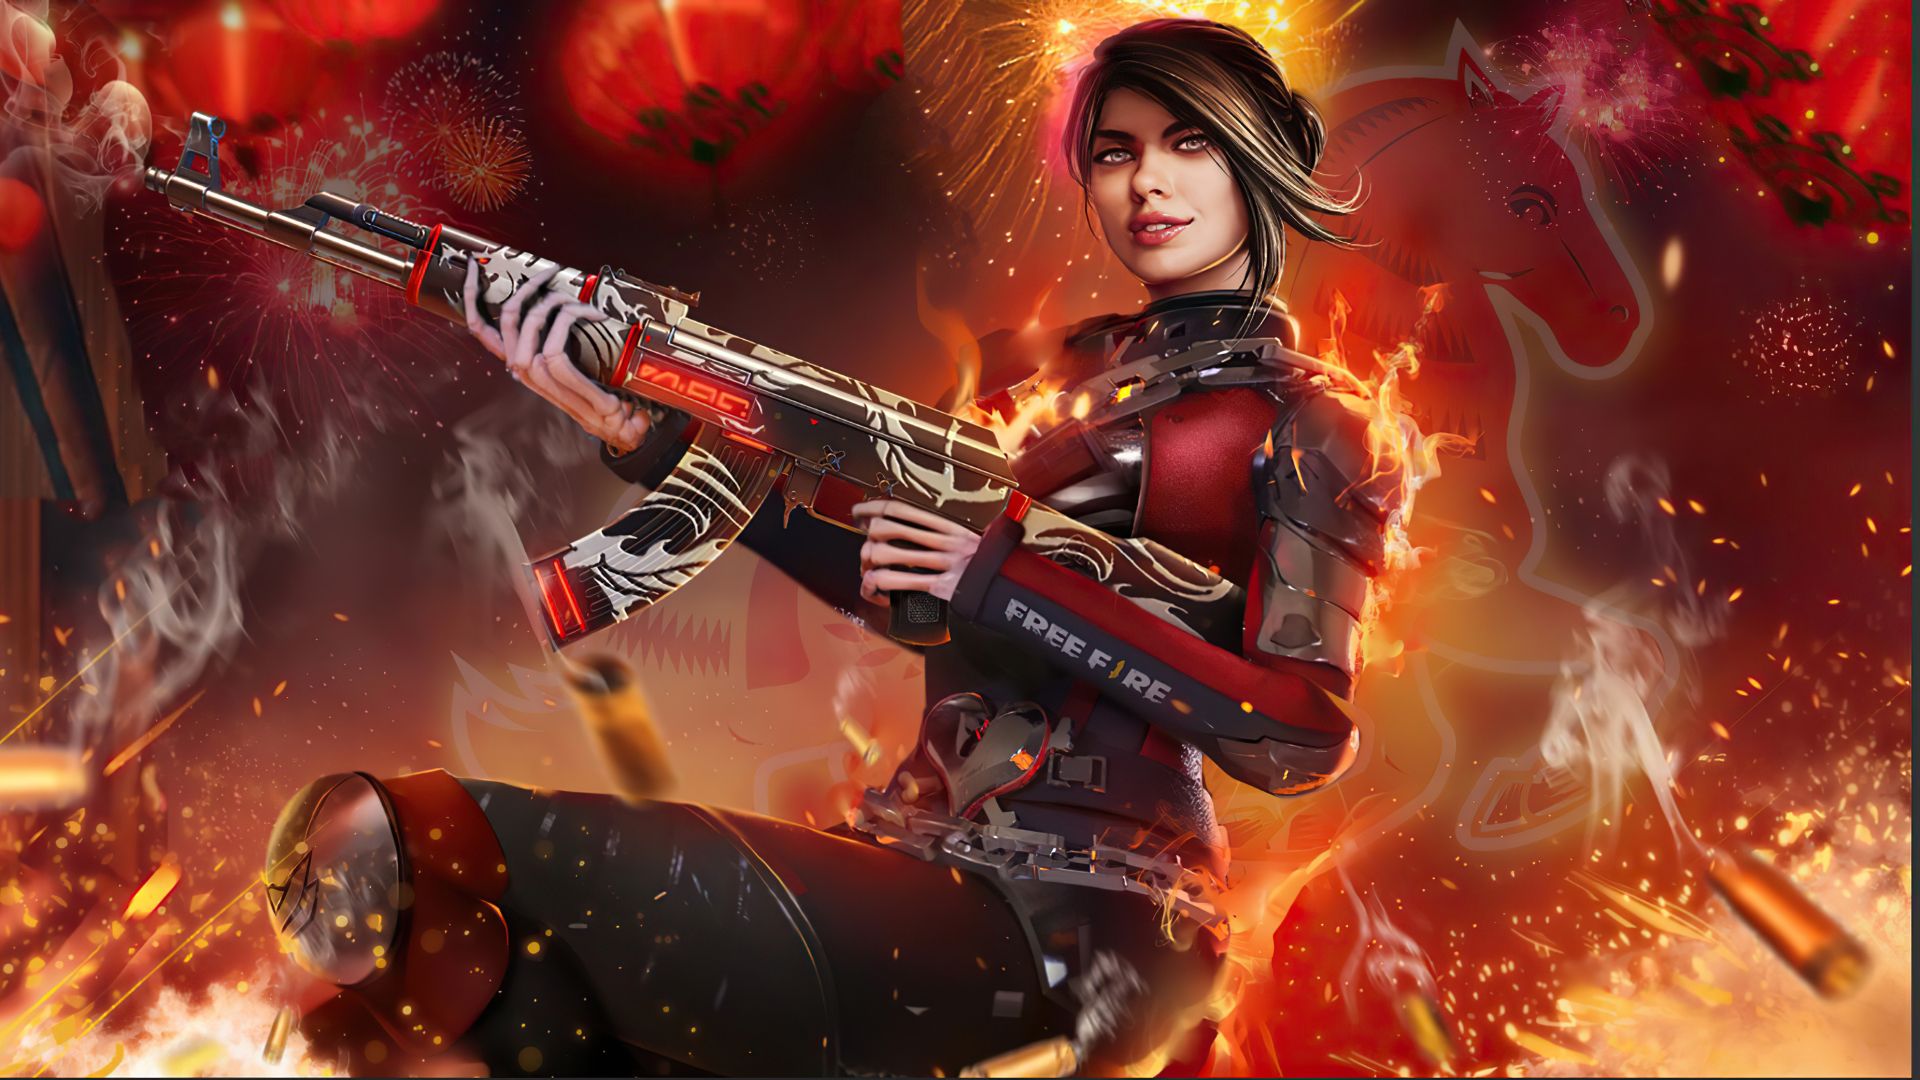 Garena Free Fire Sniper 1080P Laptop Full HD Wallpaper, HD Games 4K Wallpaper, Image, Photo and Background